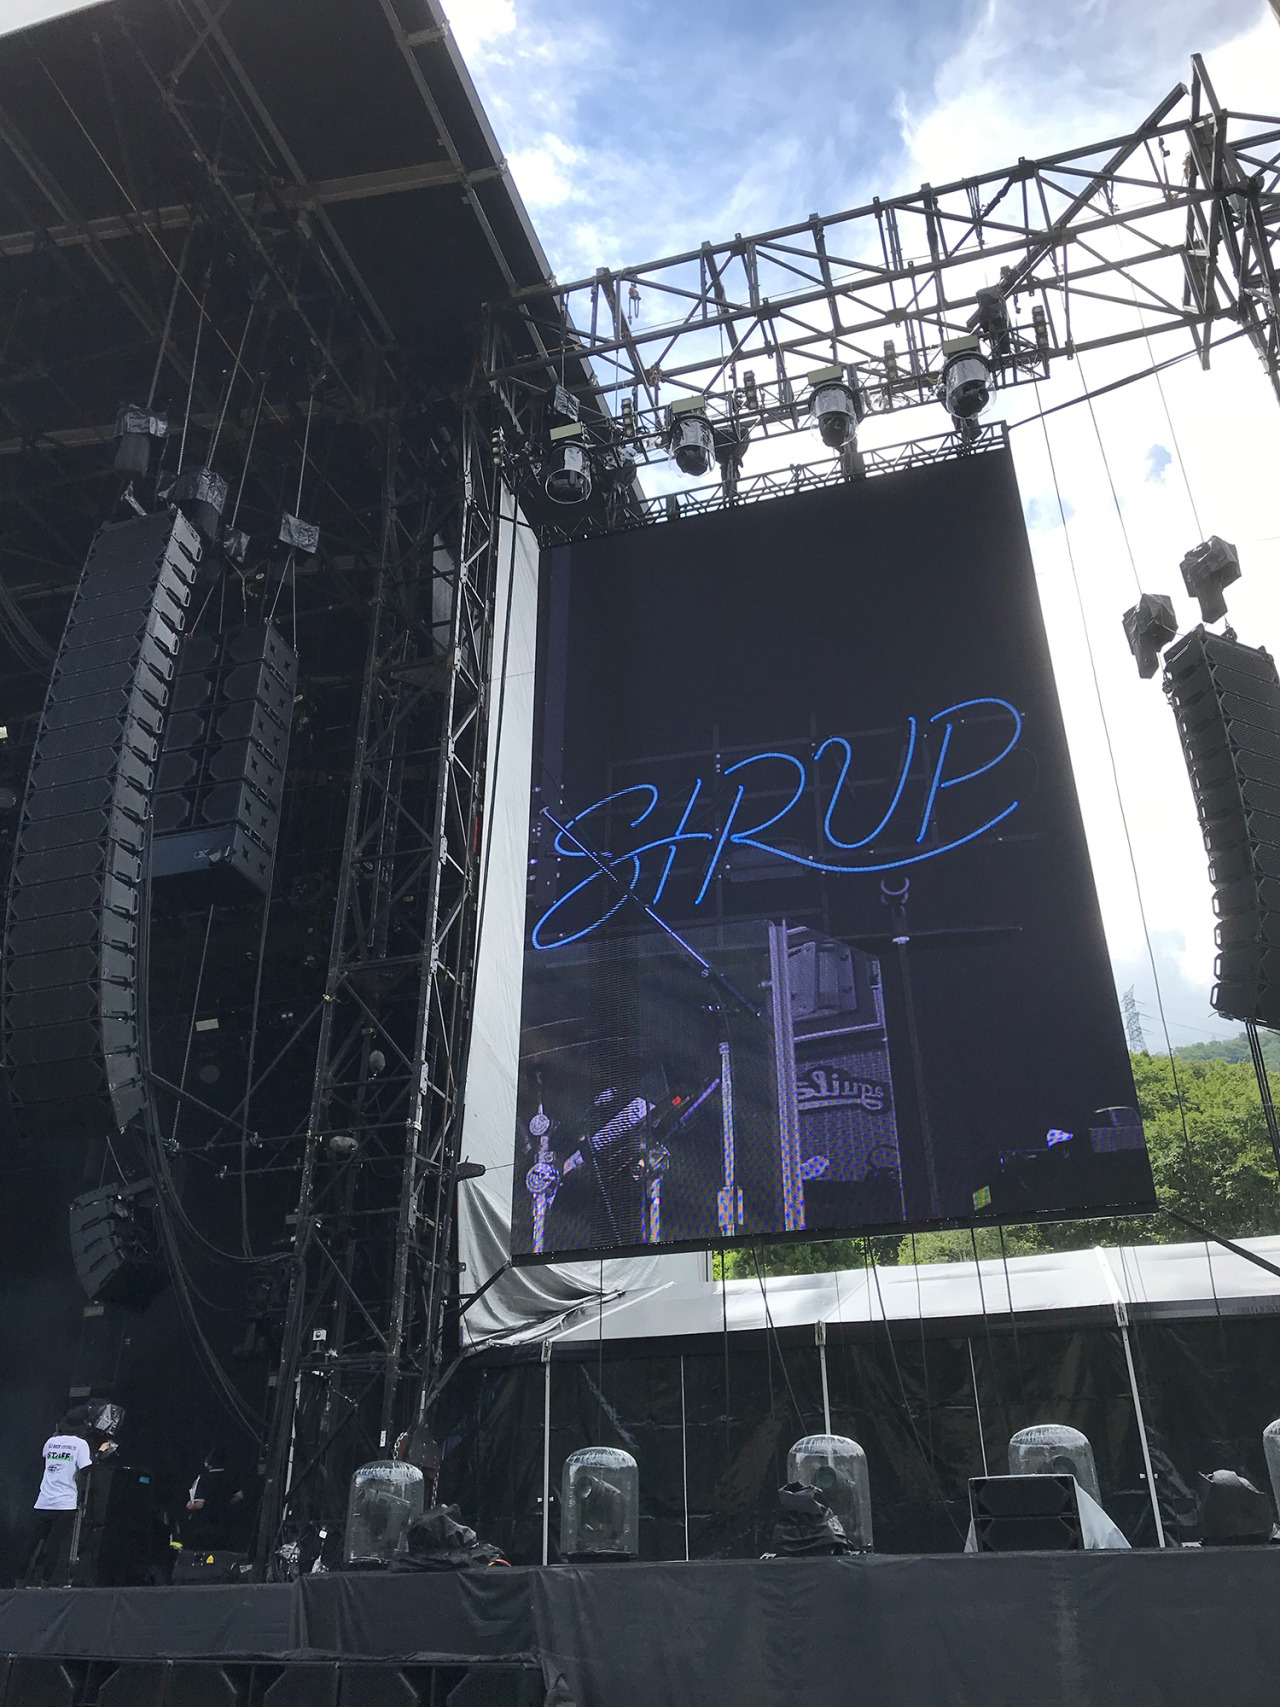 SIRUP
Fuji Rock Festival ‘21 - GREEN STAGE
2021.08.21. 新潟県湯沢町苗場スキー場1. Why Cant
2. Synapse
3. Pool
4. Overnight
5. LOOP
6. Rain
7. Keep Dancing
8. HOPELESS ROMANTIC
9. Keep In Touch
10. SWIM
11. Do Well
12. Sunshine
13. Thinkin about us
14. Runaway #SIRUP #Fuji Rock Festival ‘21 #live